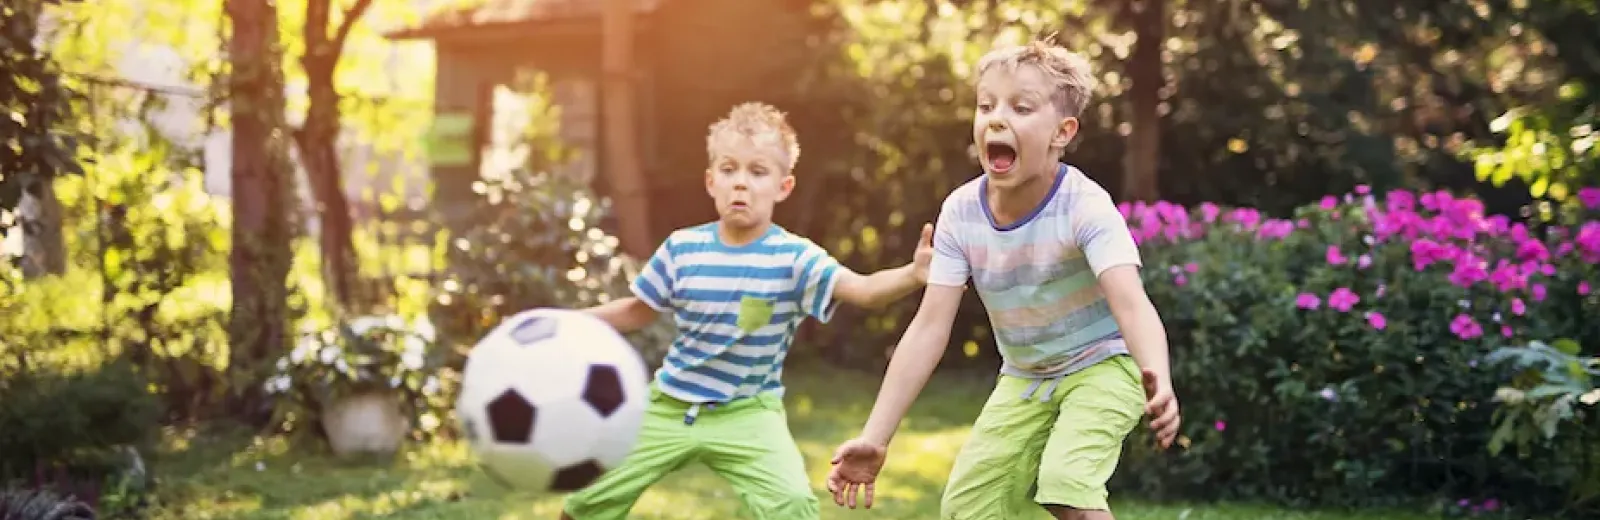 Kids playing soccer in a green yard